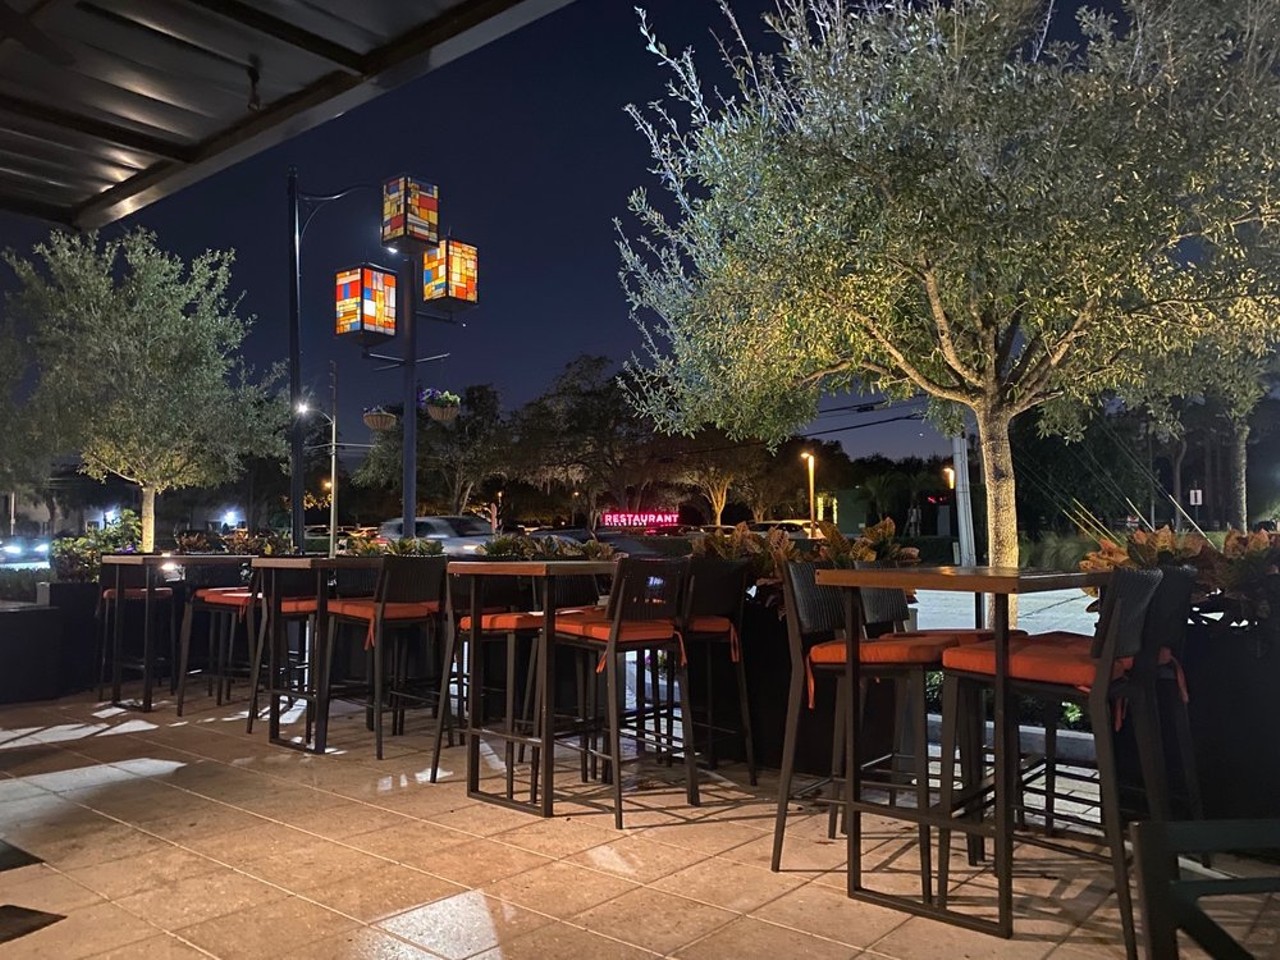 Bulla Gastrobar
4.5 out of 5 stars, 996 reviews
110 S. Orlando Ave., Suite 7, Winter Park
”Classy tapas for the suburban crowd. Solid selections and an above average wine selection. If that sounds like a great date night place, it is.” - Robert F.